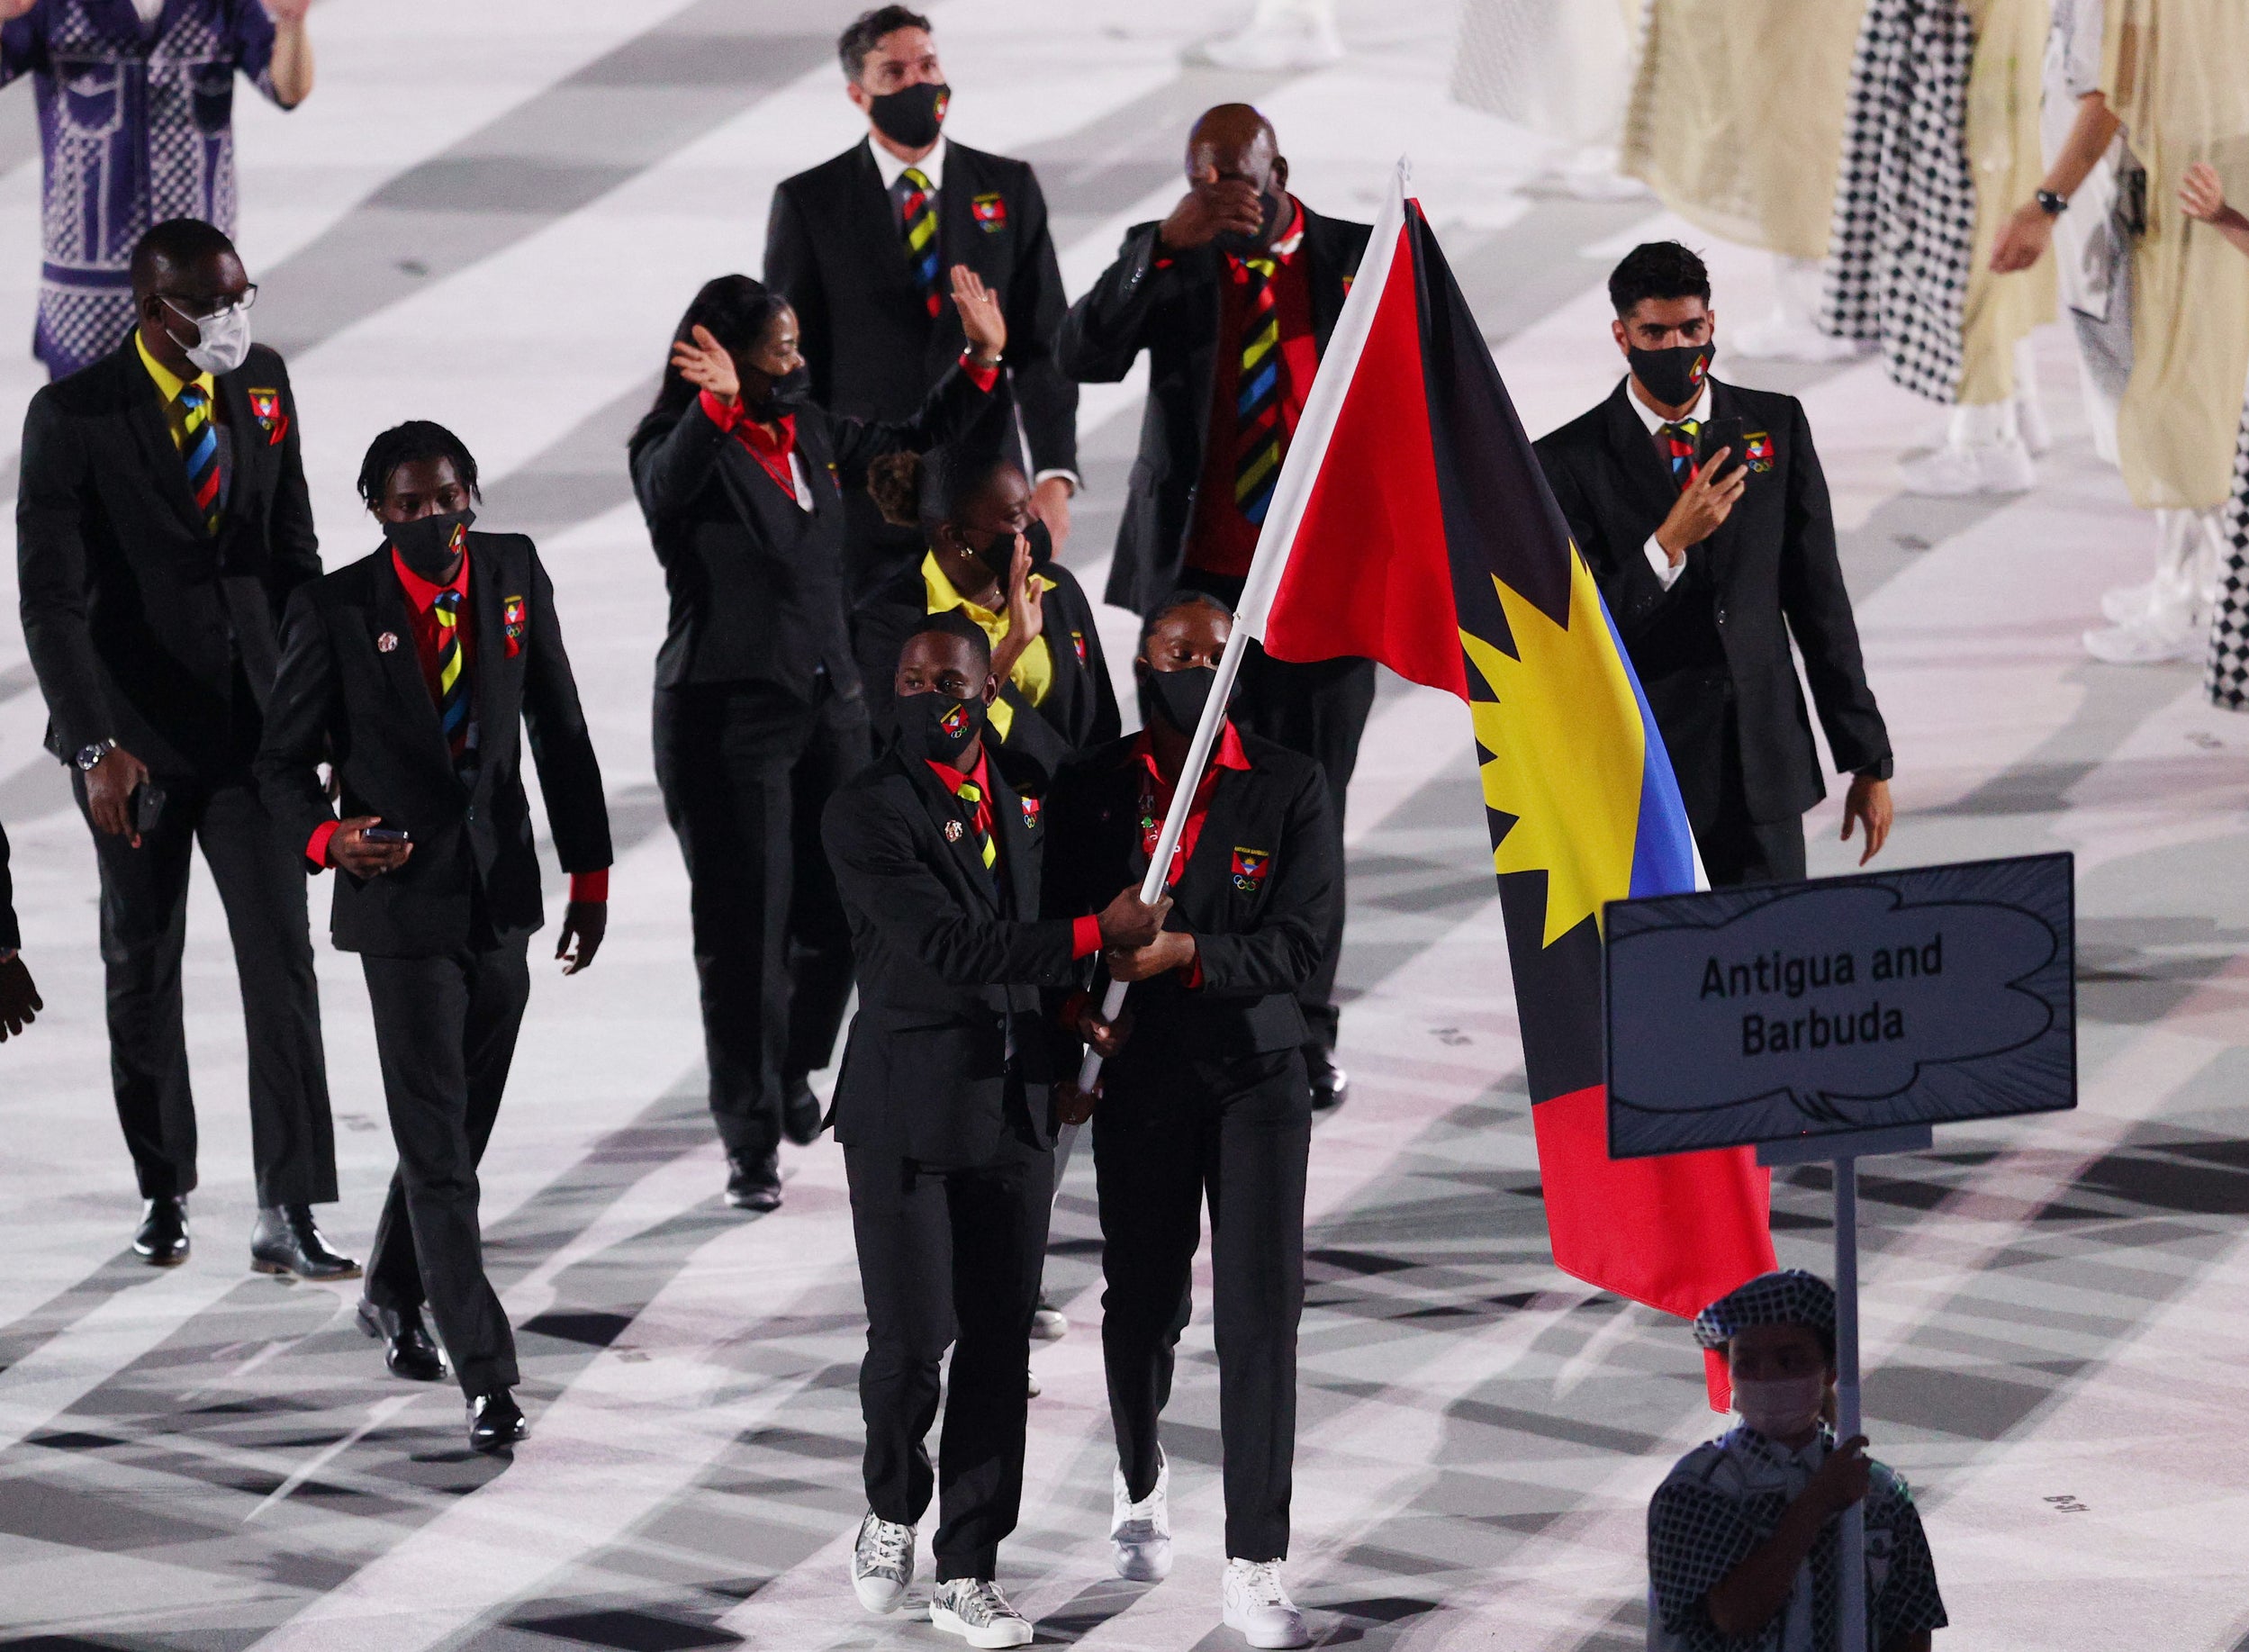 The athletes wore dark suits with ties and shirts that match the colors of their flag